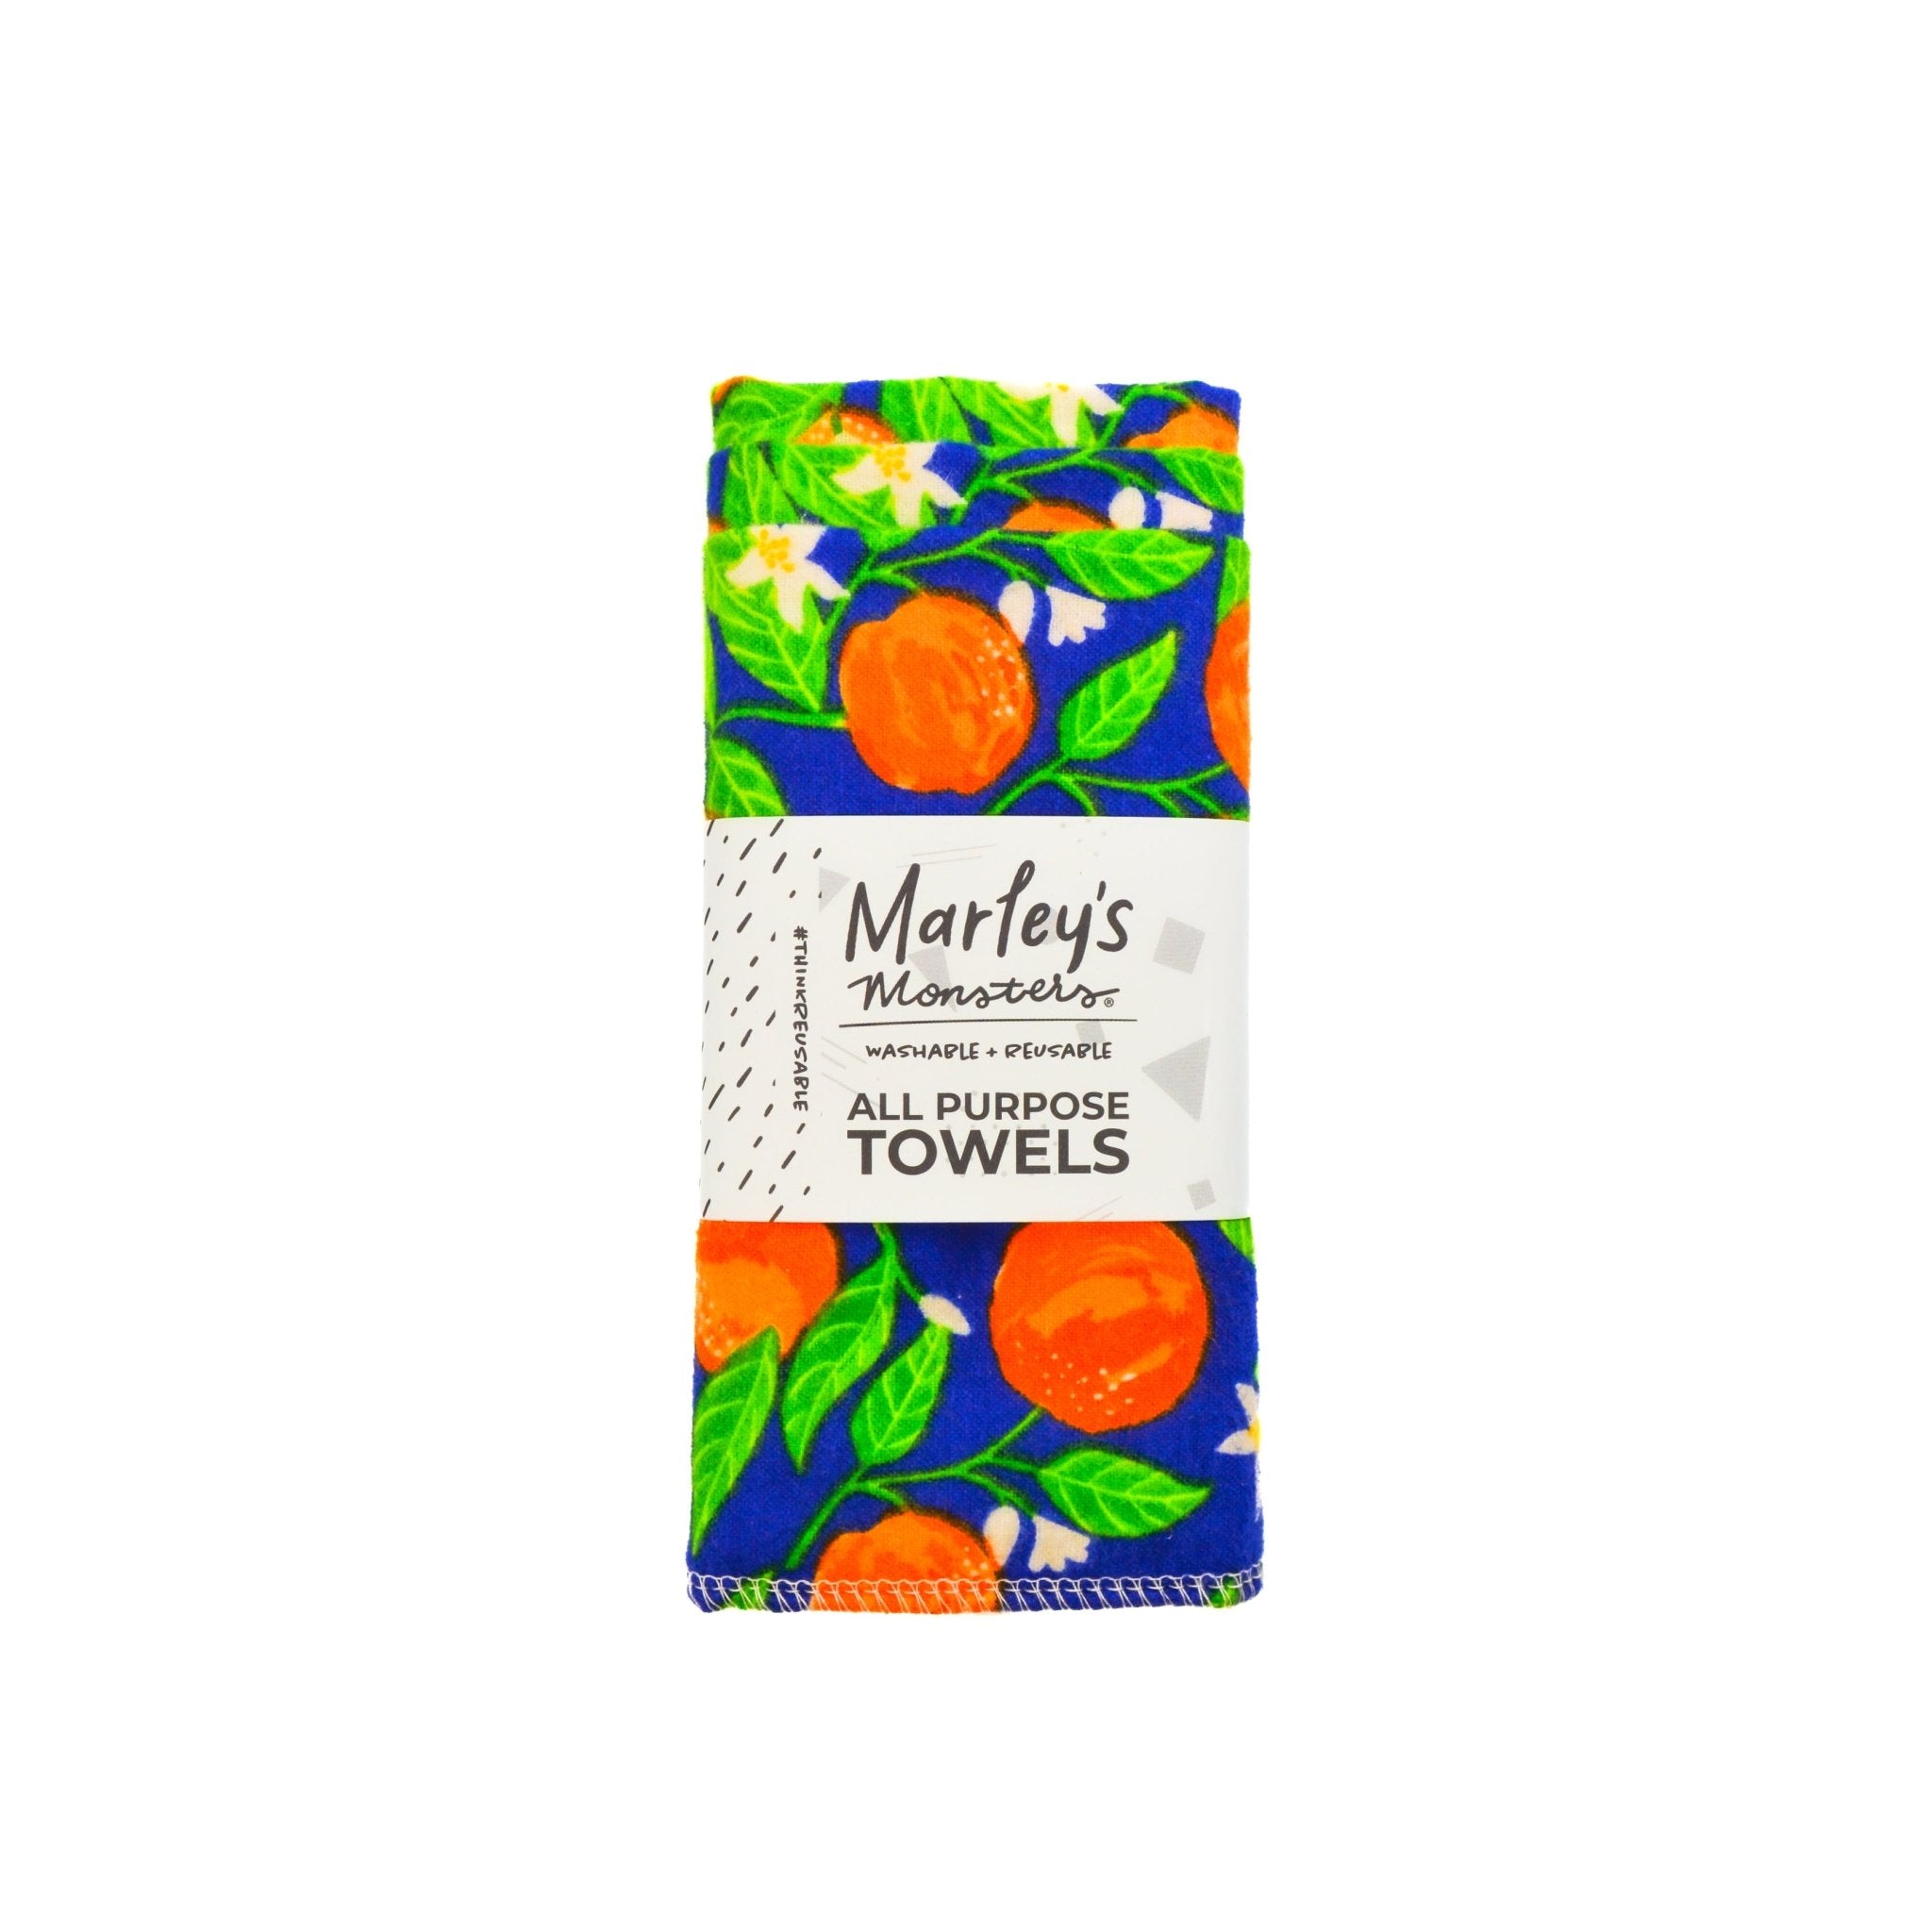 All-Purpose Towels - Marley's Monsters